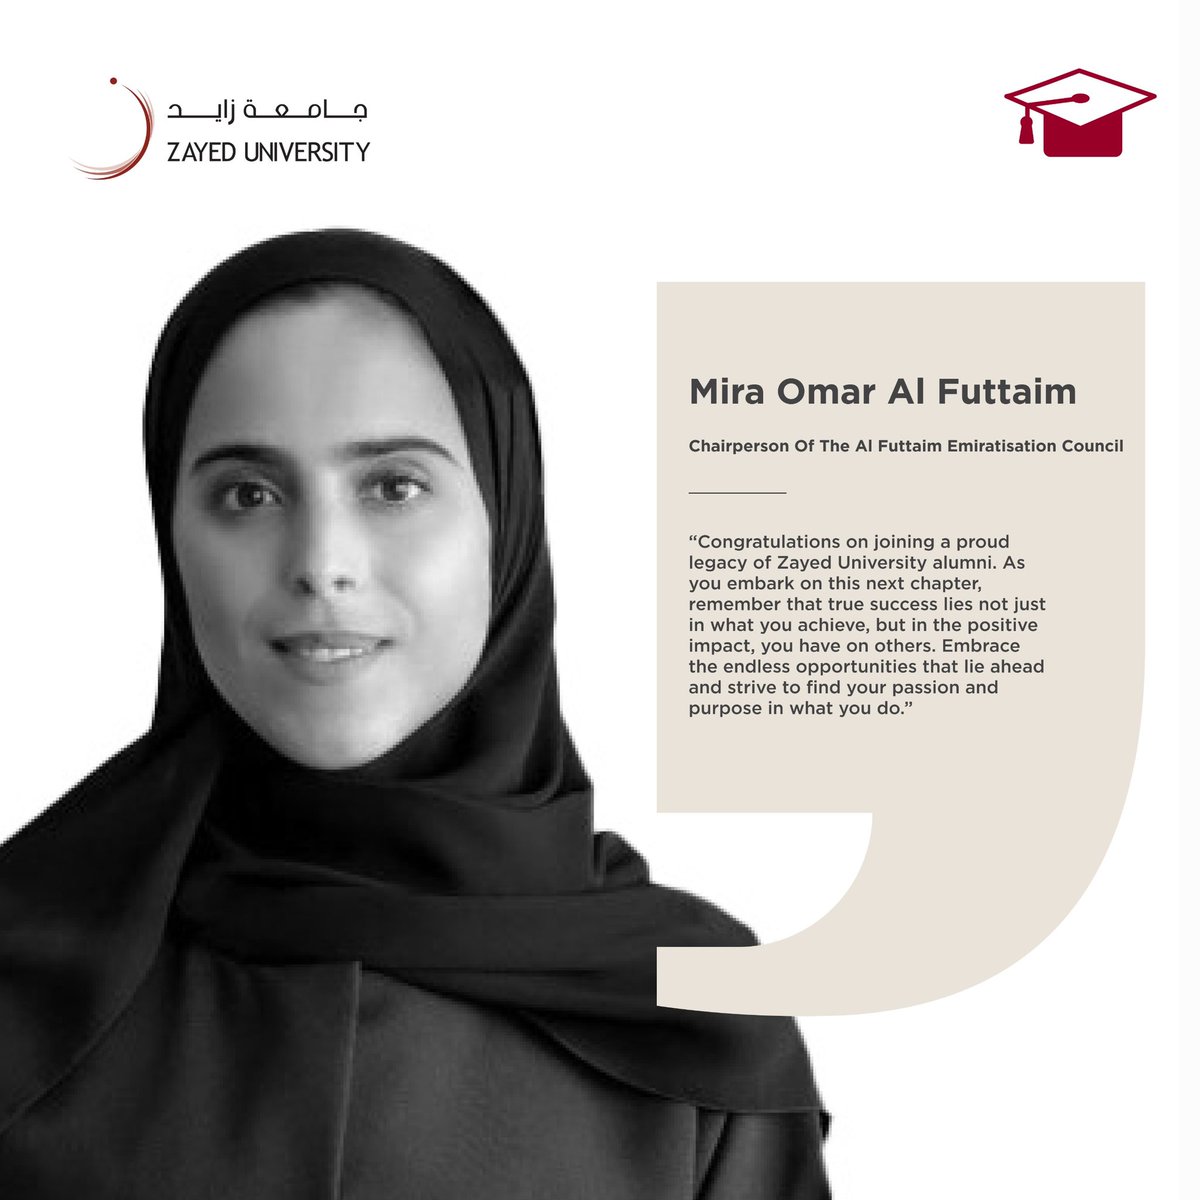 Zayed University Board of Trustees Member, Mira Omar Al Futtaim, proudly congratulates the Class of 2024.

Your resilience and education at Zayed University have prepared you well for the future challenges that lie ahead.

#Proud_ZUAlumni #ZUFutureMakers #ZU #ZayedUniversity